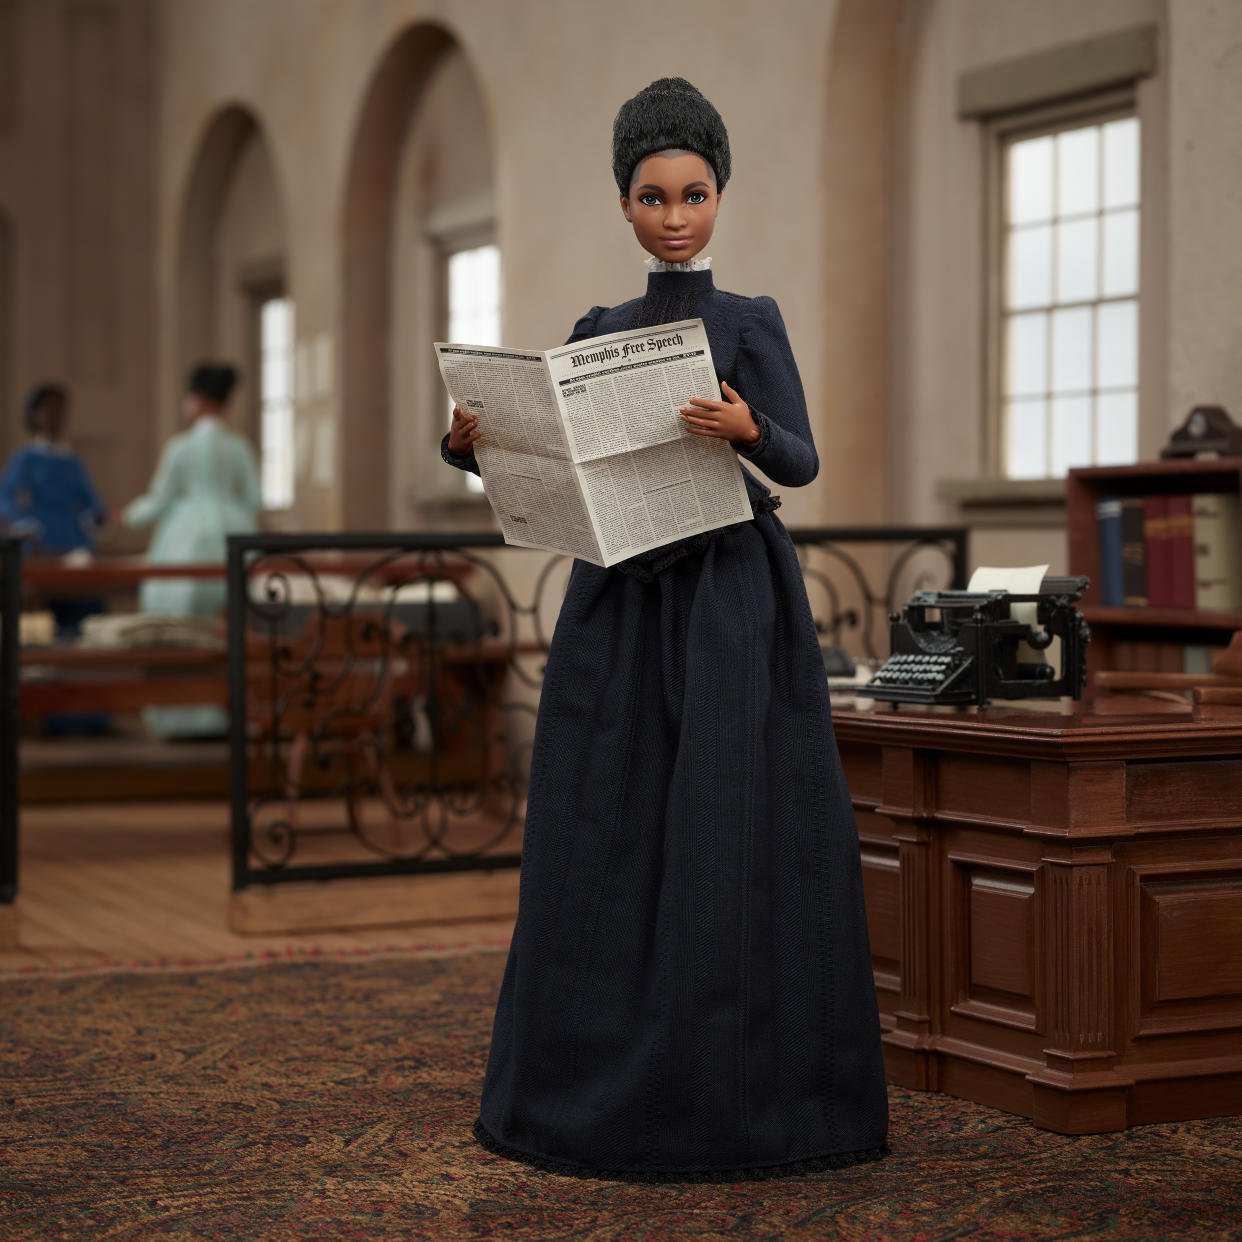 The latest doll to join Barbie's Inspiring Women series is Ida B. Wells, a journalist and early leader in the civil rights movement who not only fought for African American equality, but for that of women. (Photo: Mattel)
